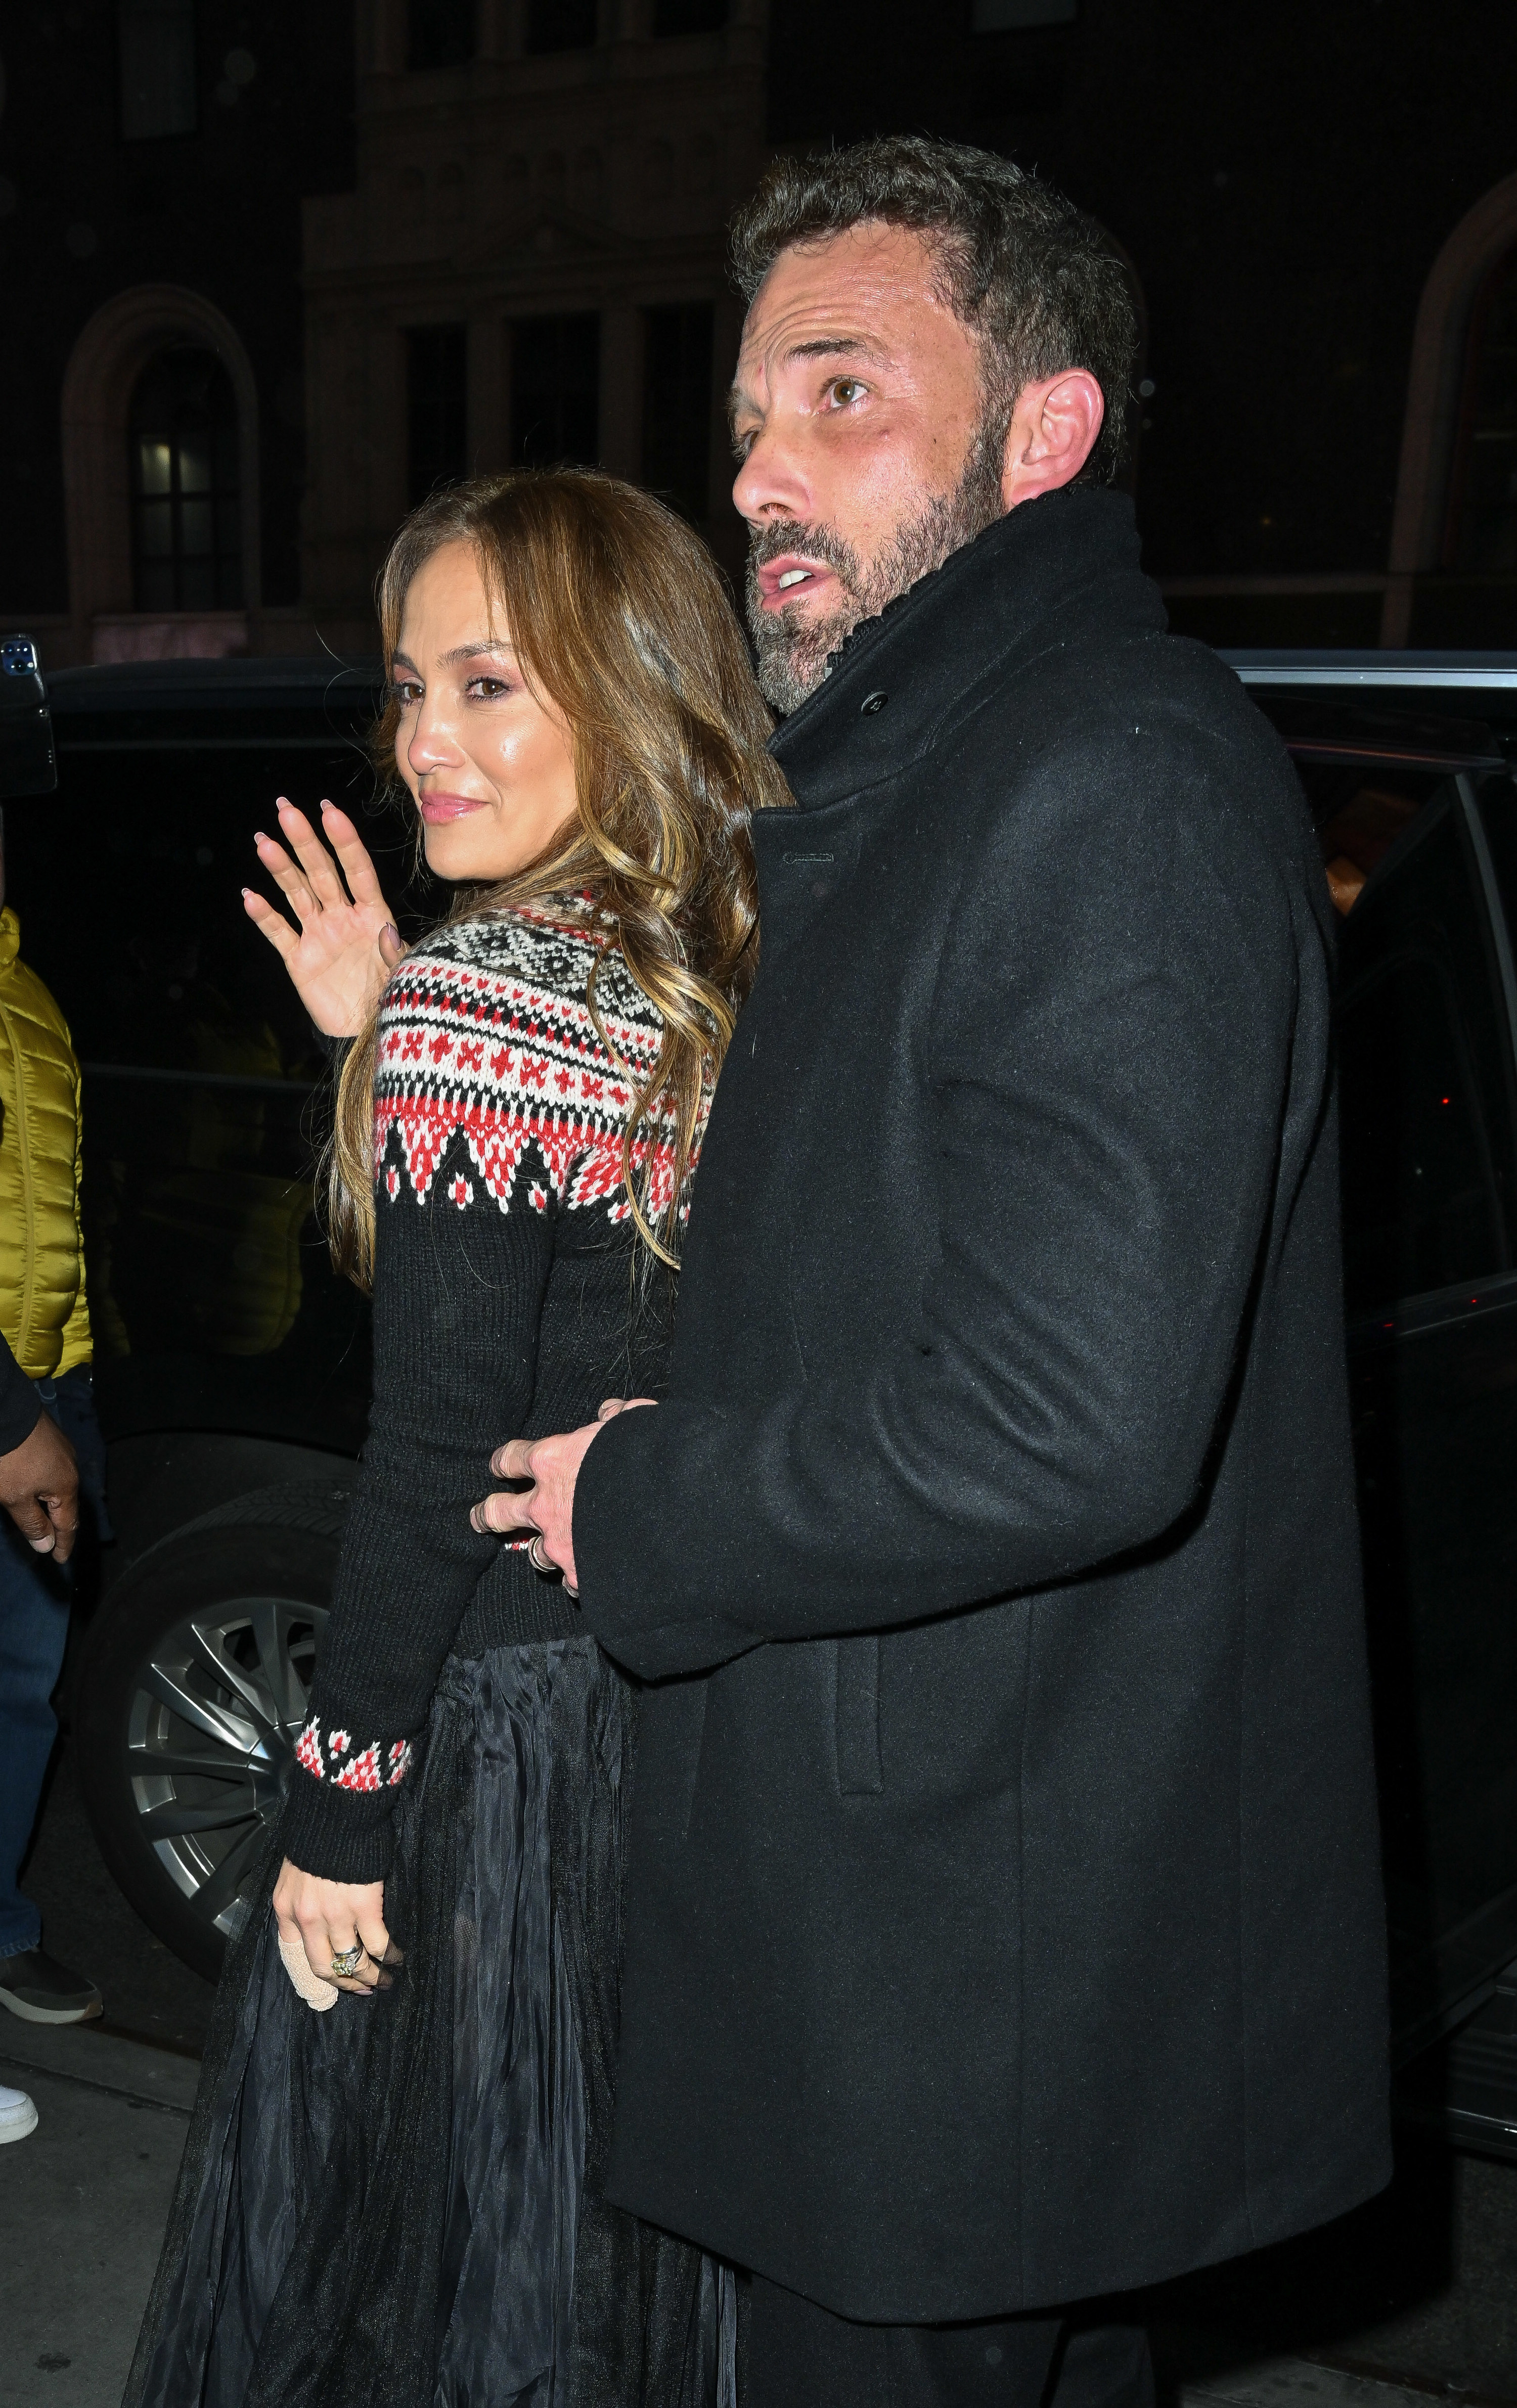 Ben waving with JLo